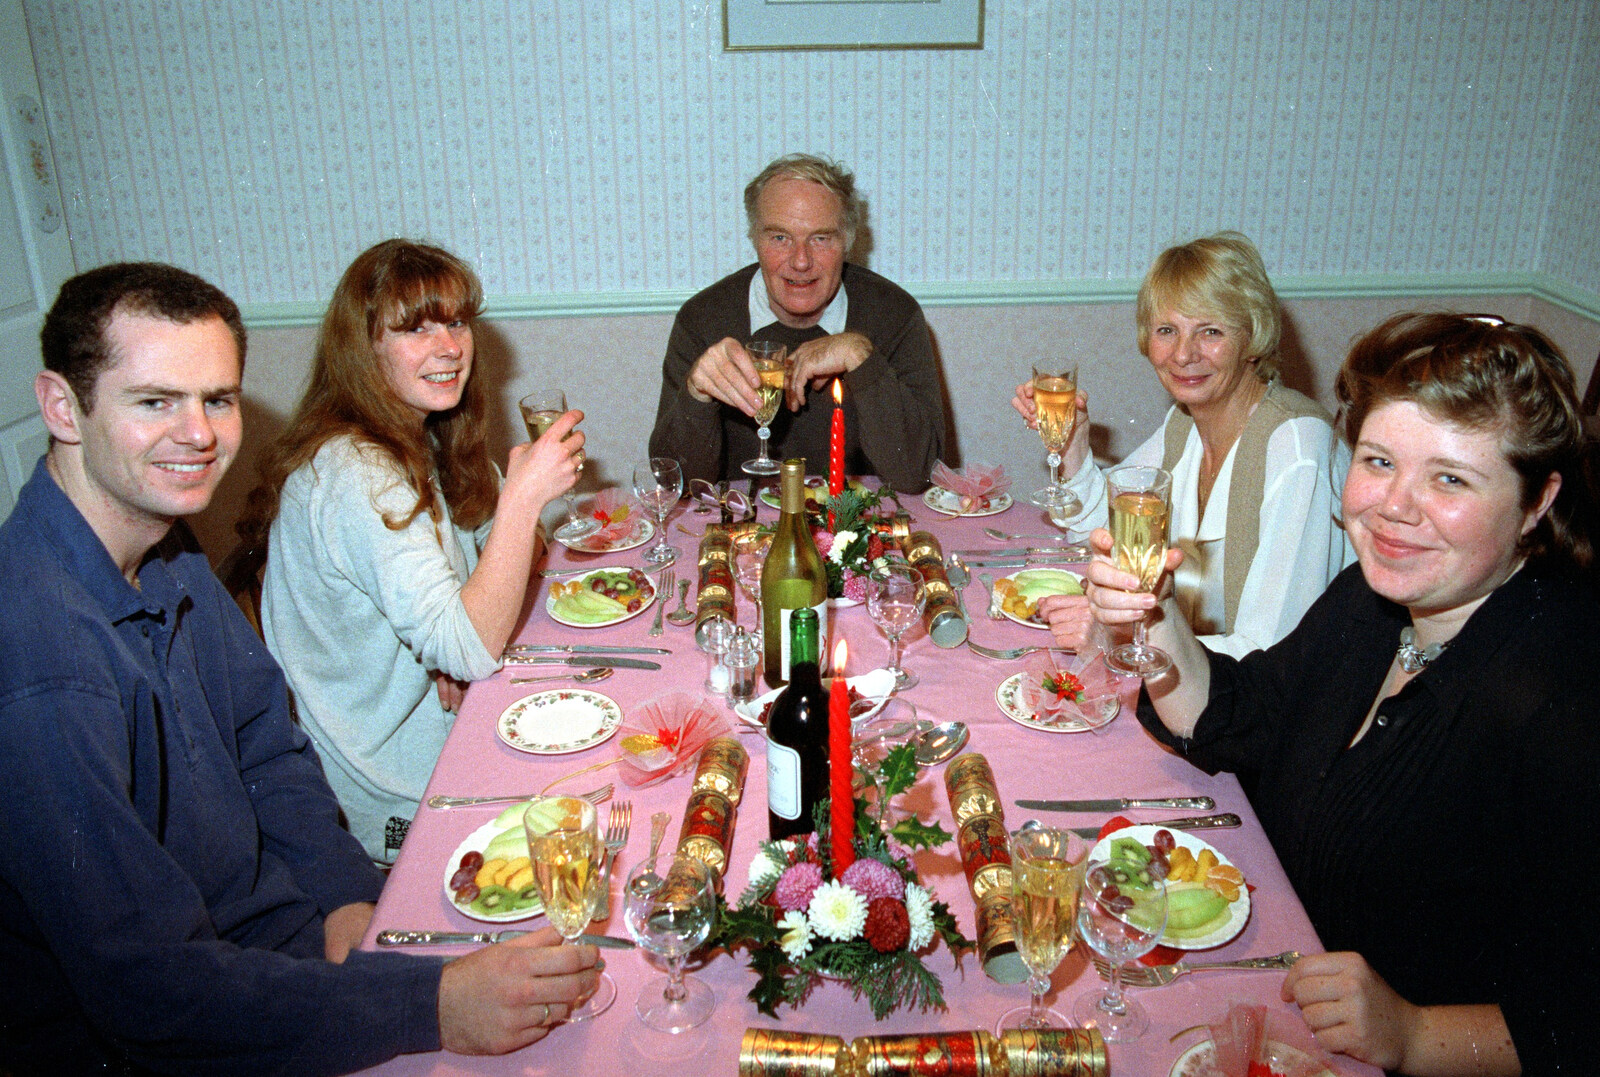 It's Christmas lunch with the Old Man and Katie from Christmas Up North, Macclesfield, Cheshire - 25th December 1995